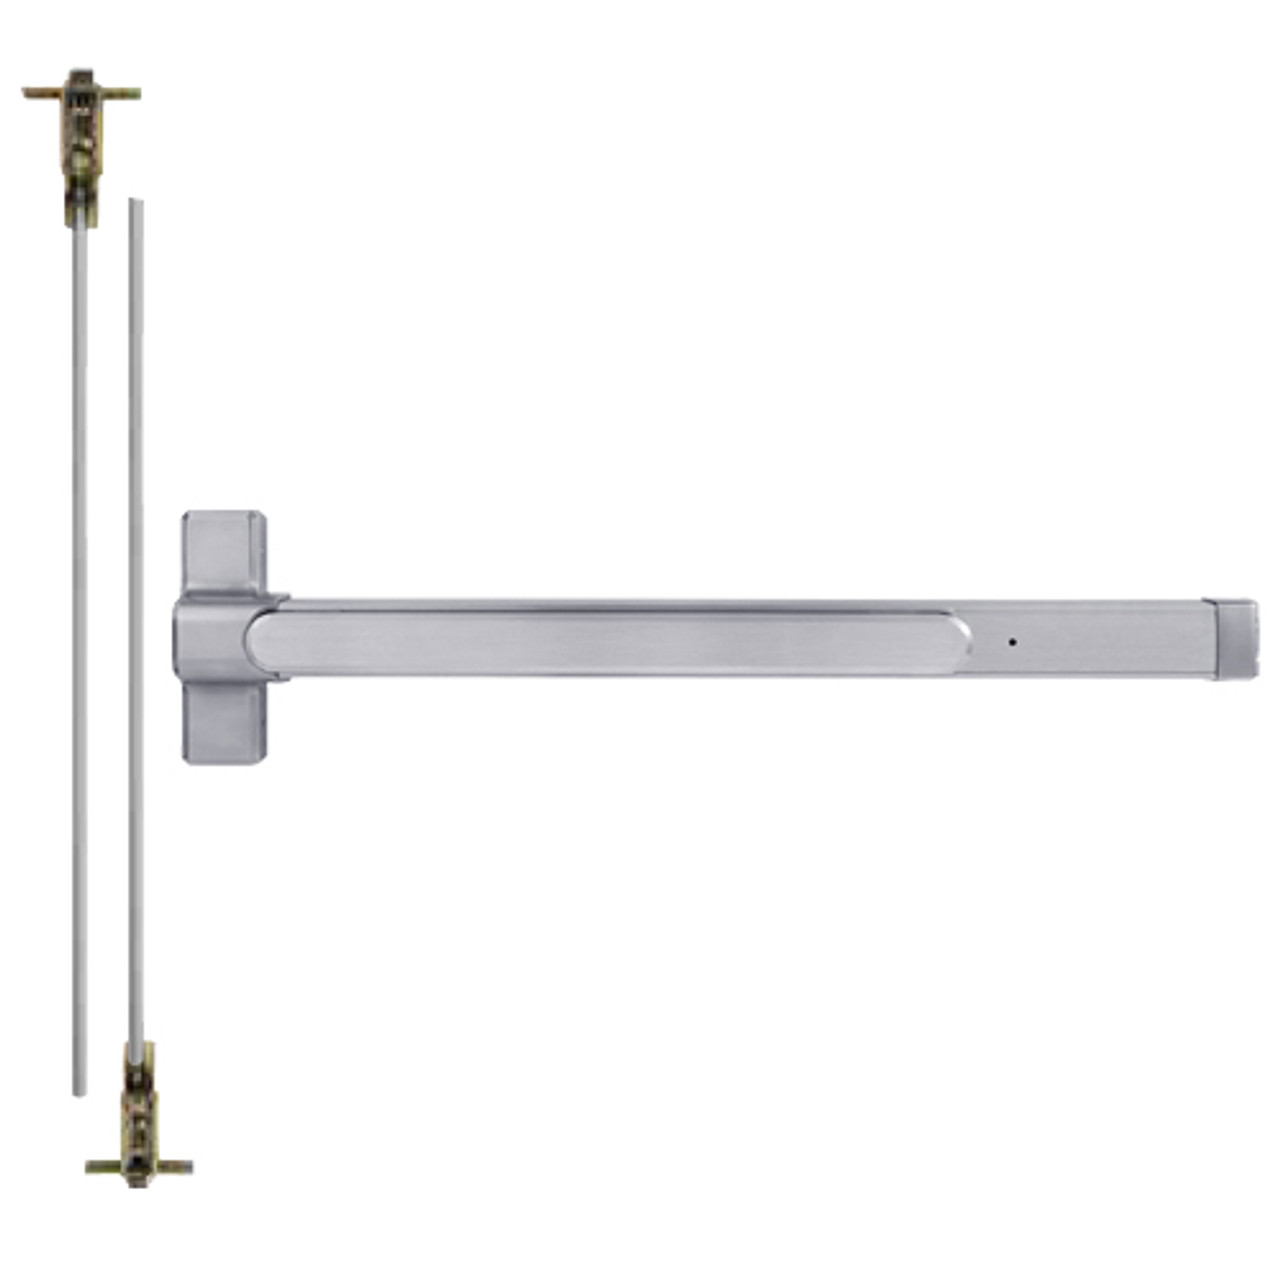 QED126LR-36-8-626 Stanley QED100 Series Heavy Duty Concealed Vertical Rod Fire Rated Exit Device in Satin Chrome Finish